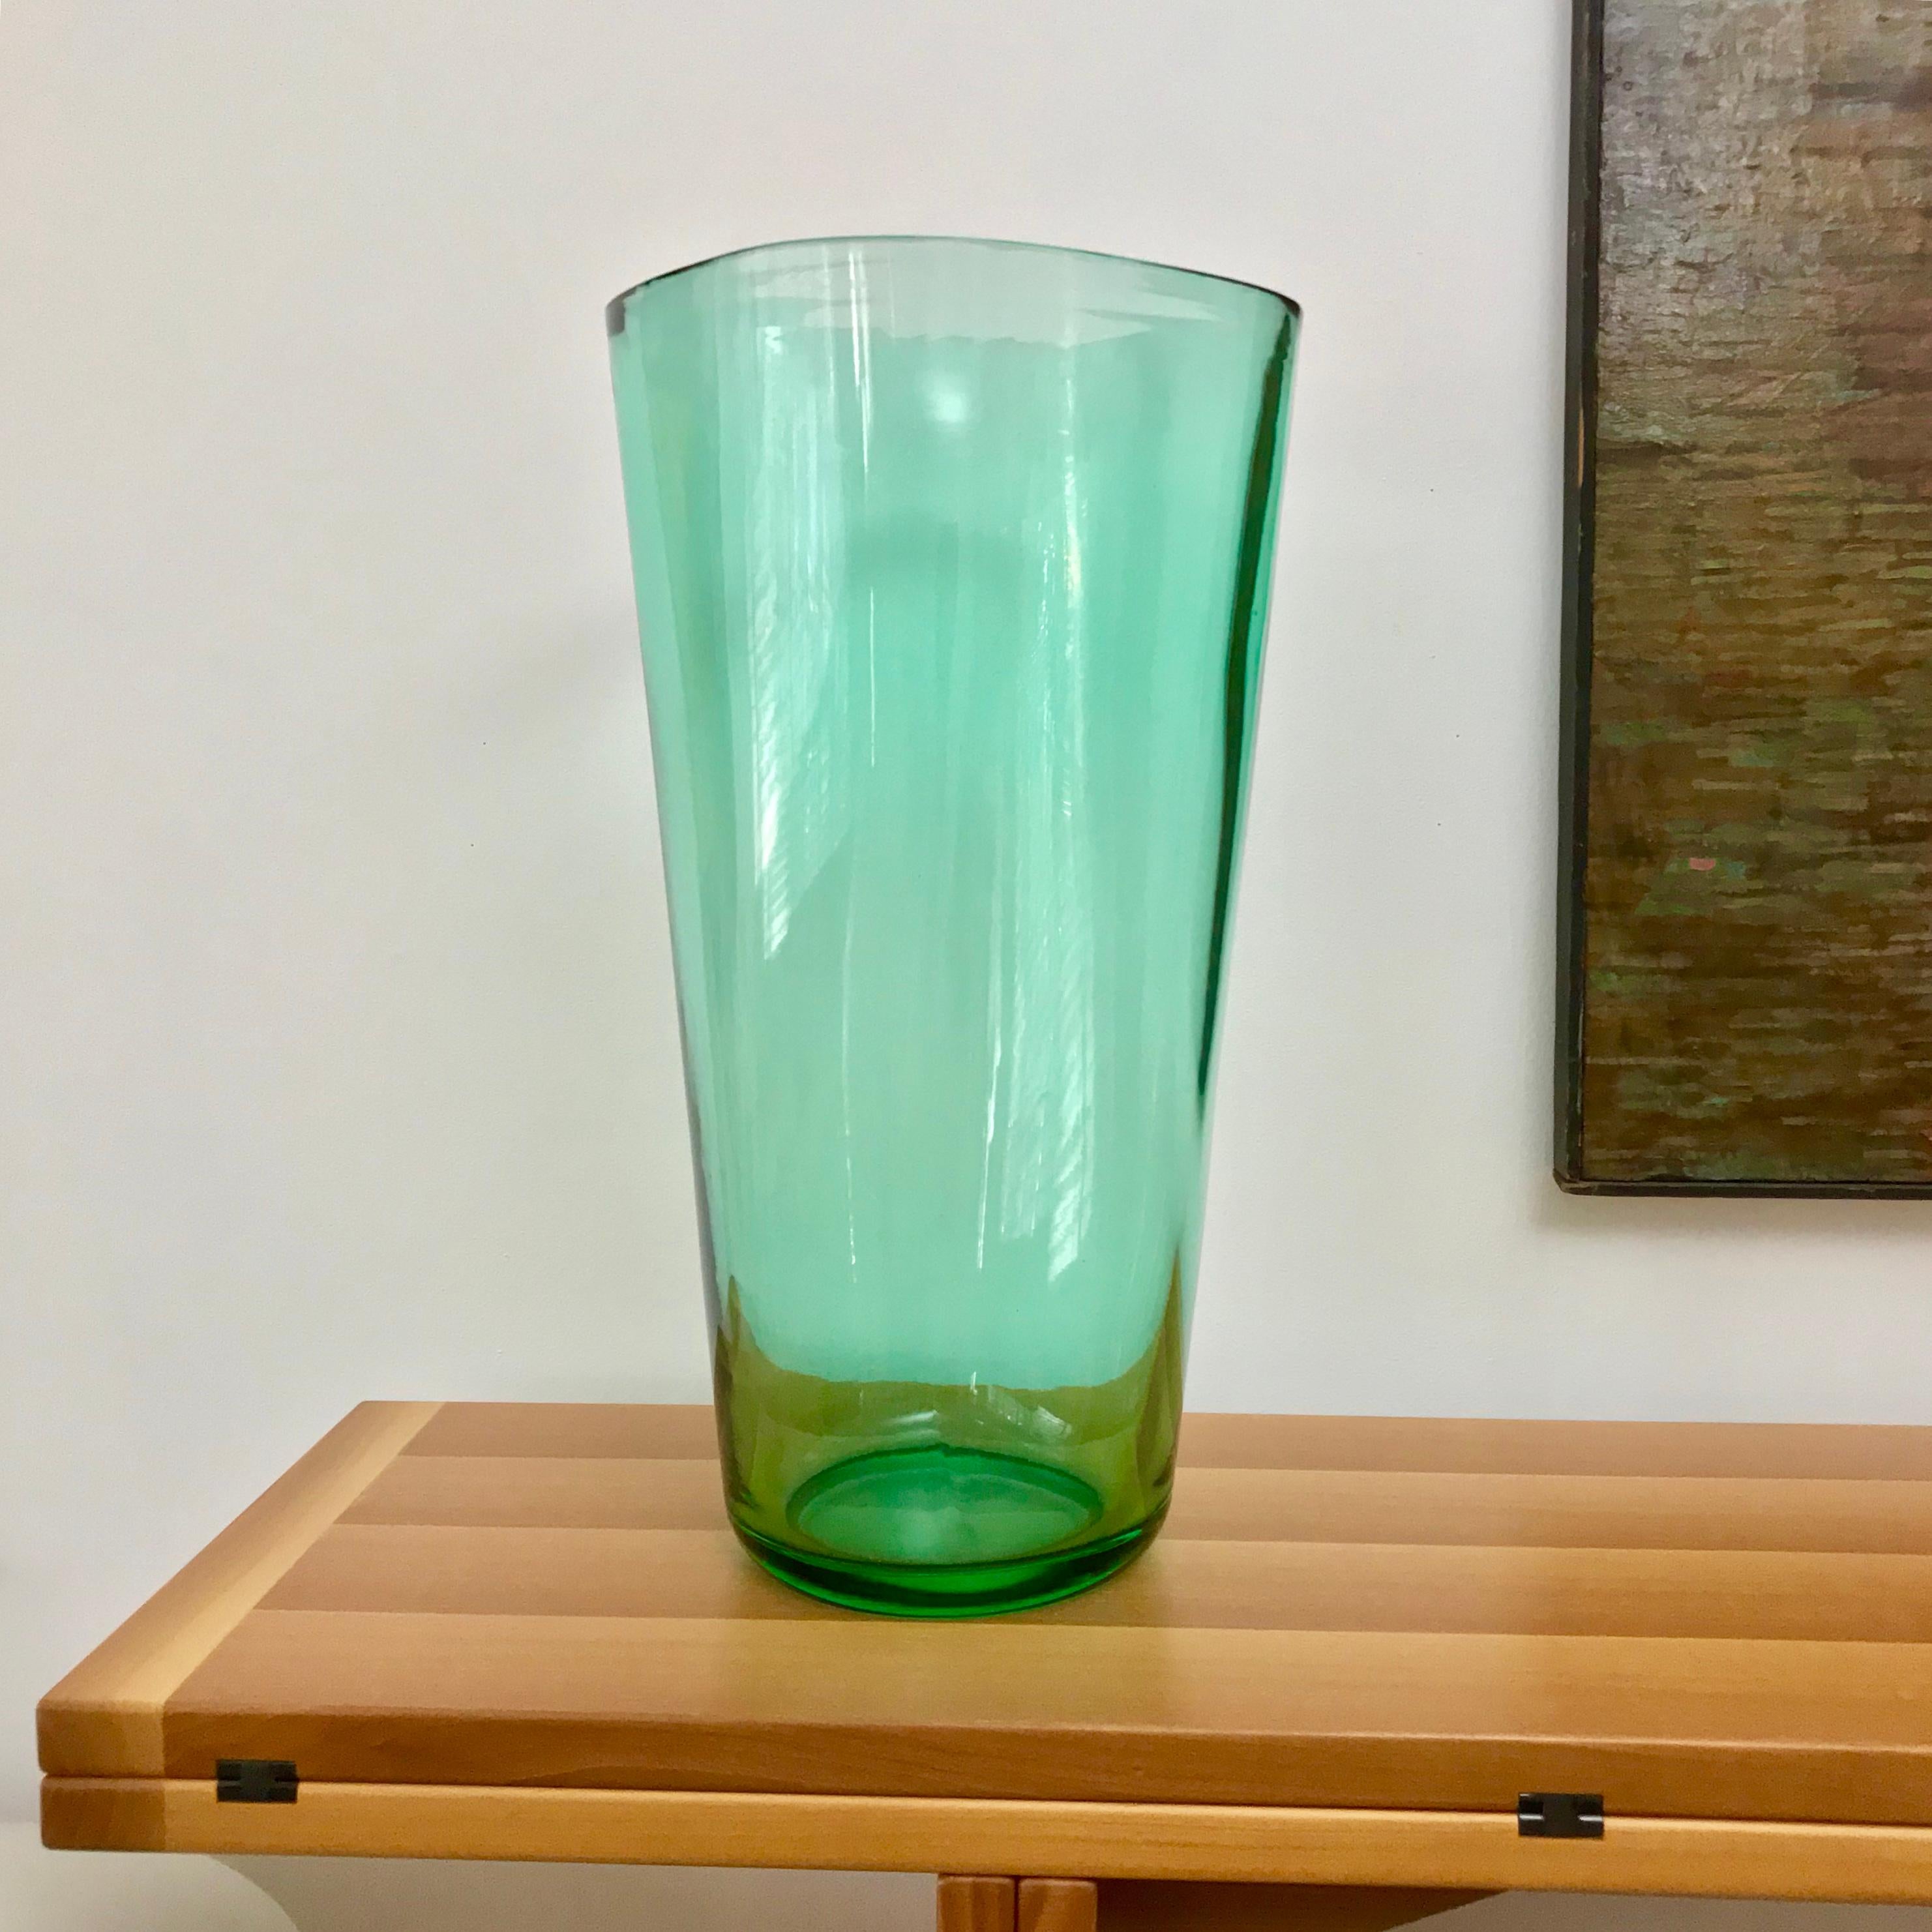 A beautiful, vintage, large green Murano glass vase designed by Karl Springer in the 1980's.  